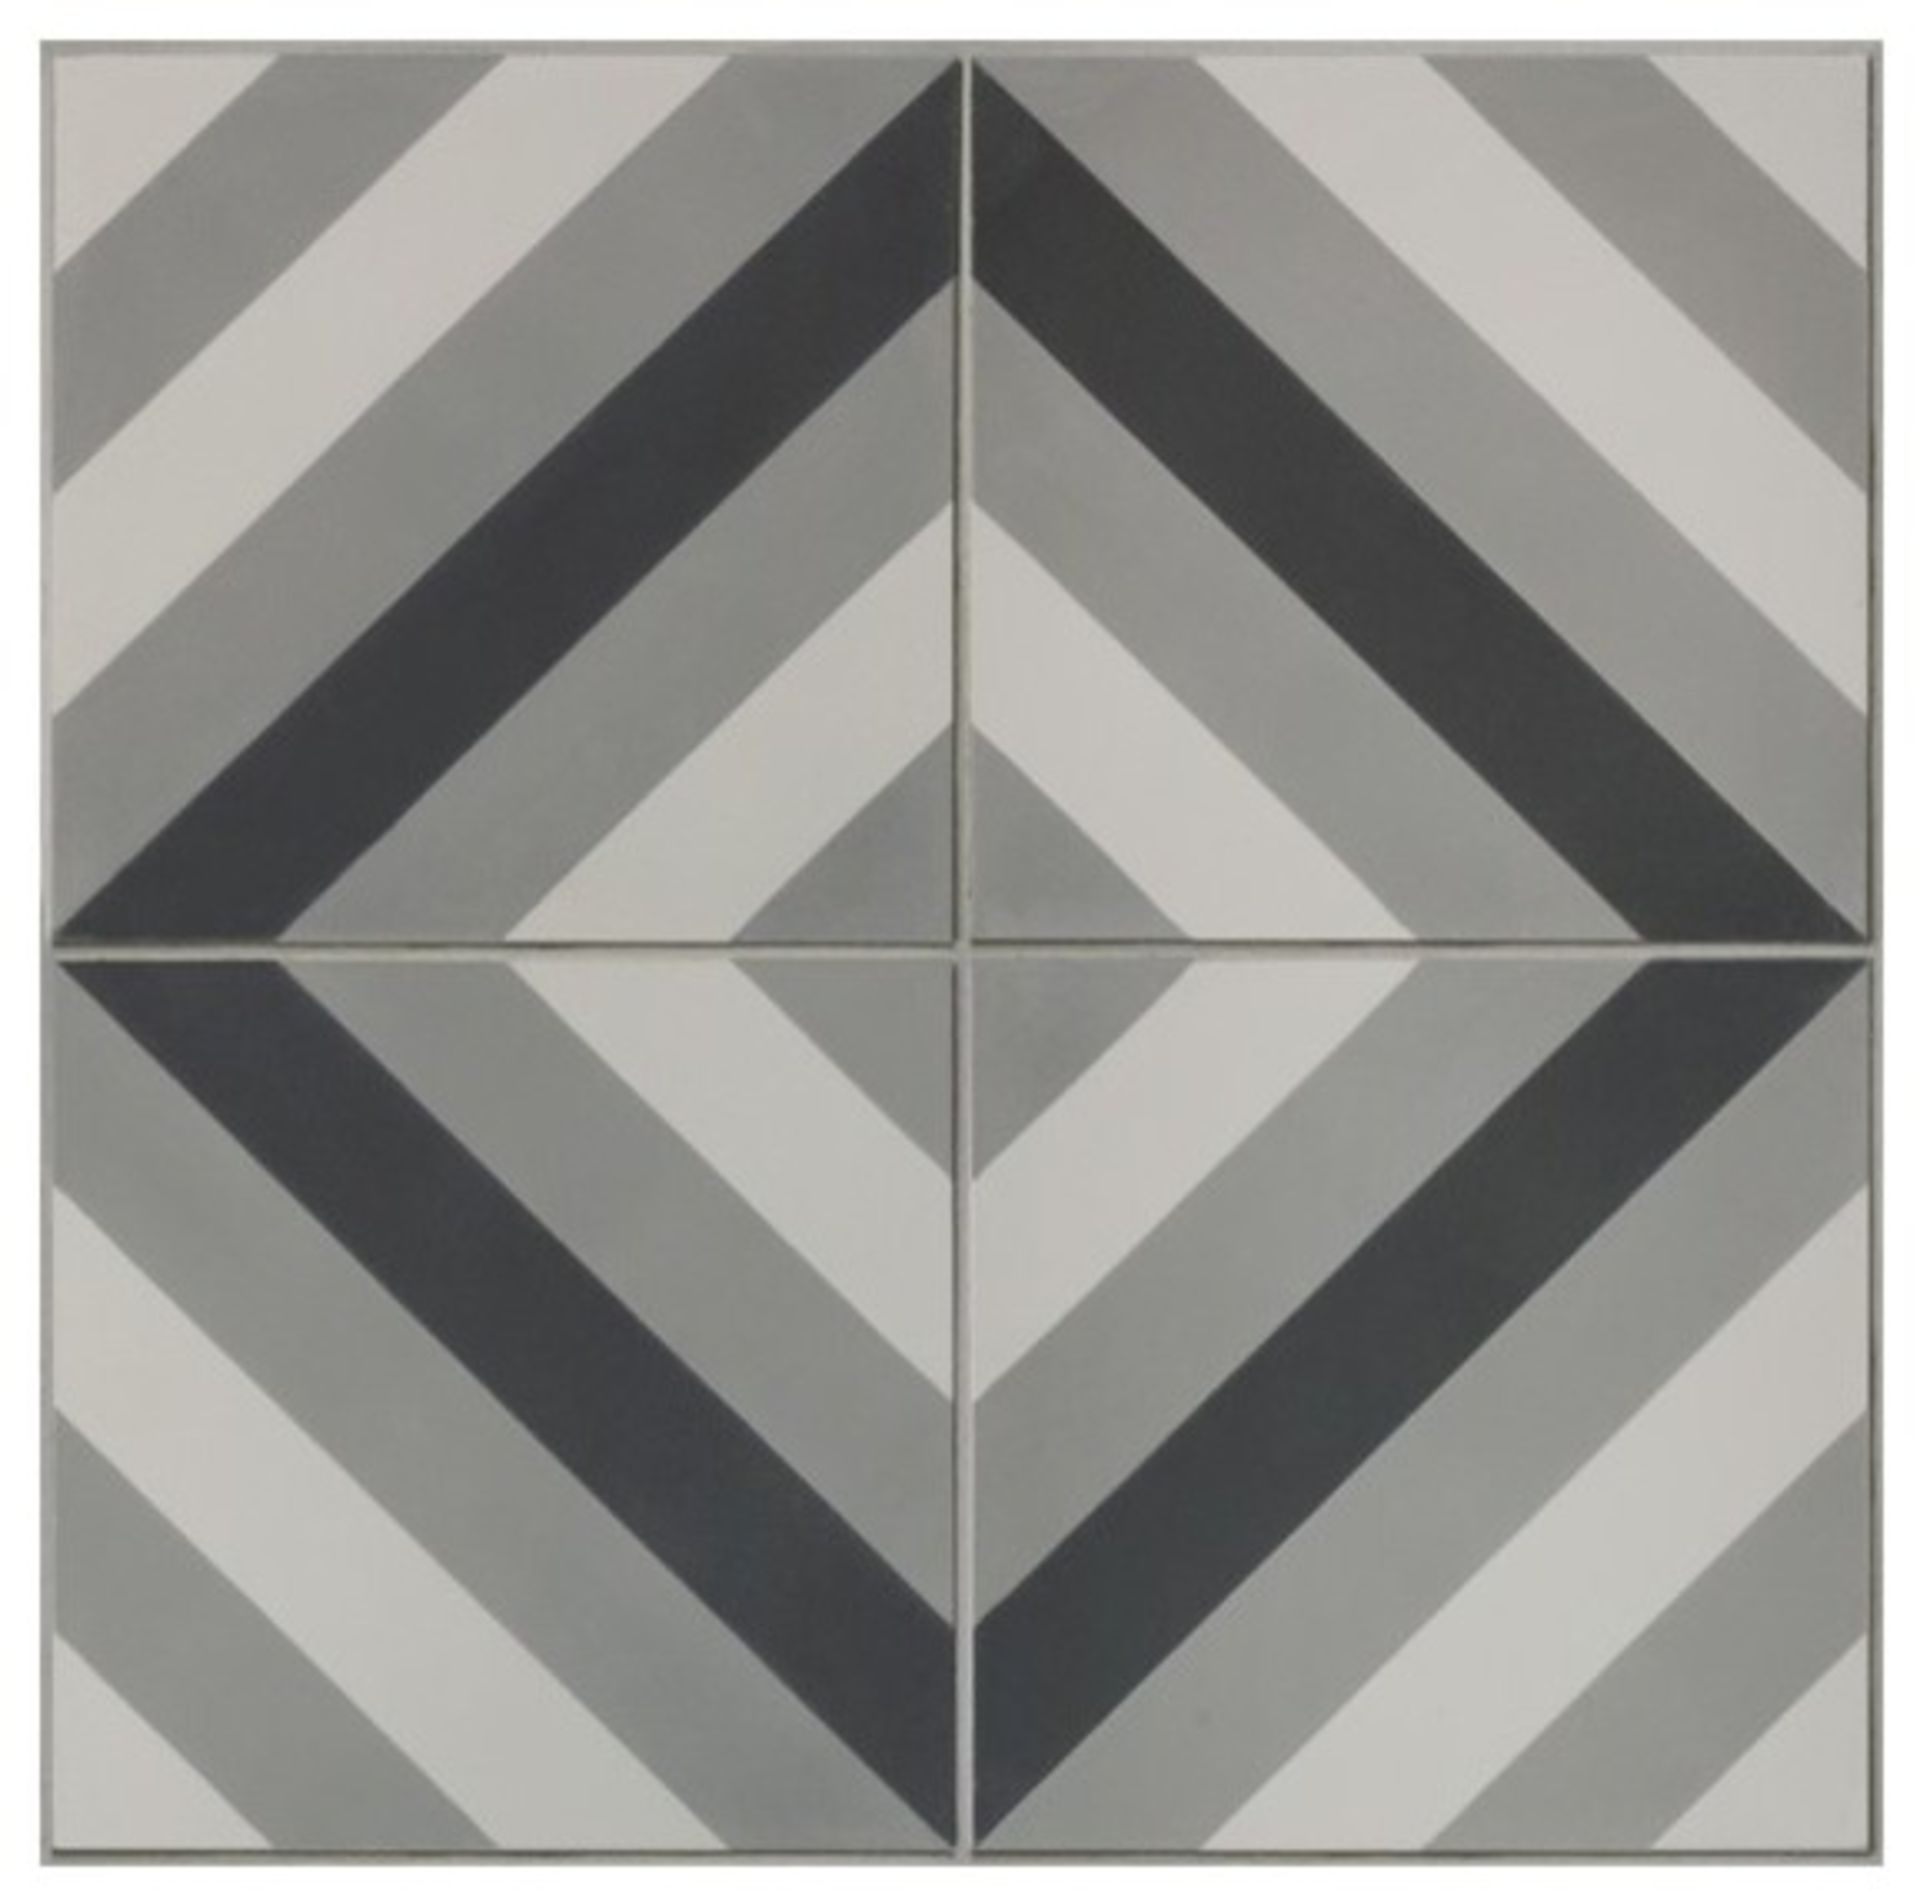 1 BOXED RRP £40.00 BRIGHTON PATTERN TILES SET OF 12 COVERING 0.45 SQM (VIEWING AVAILABLE)